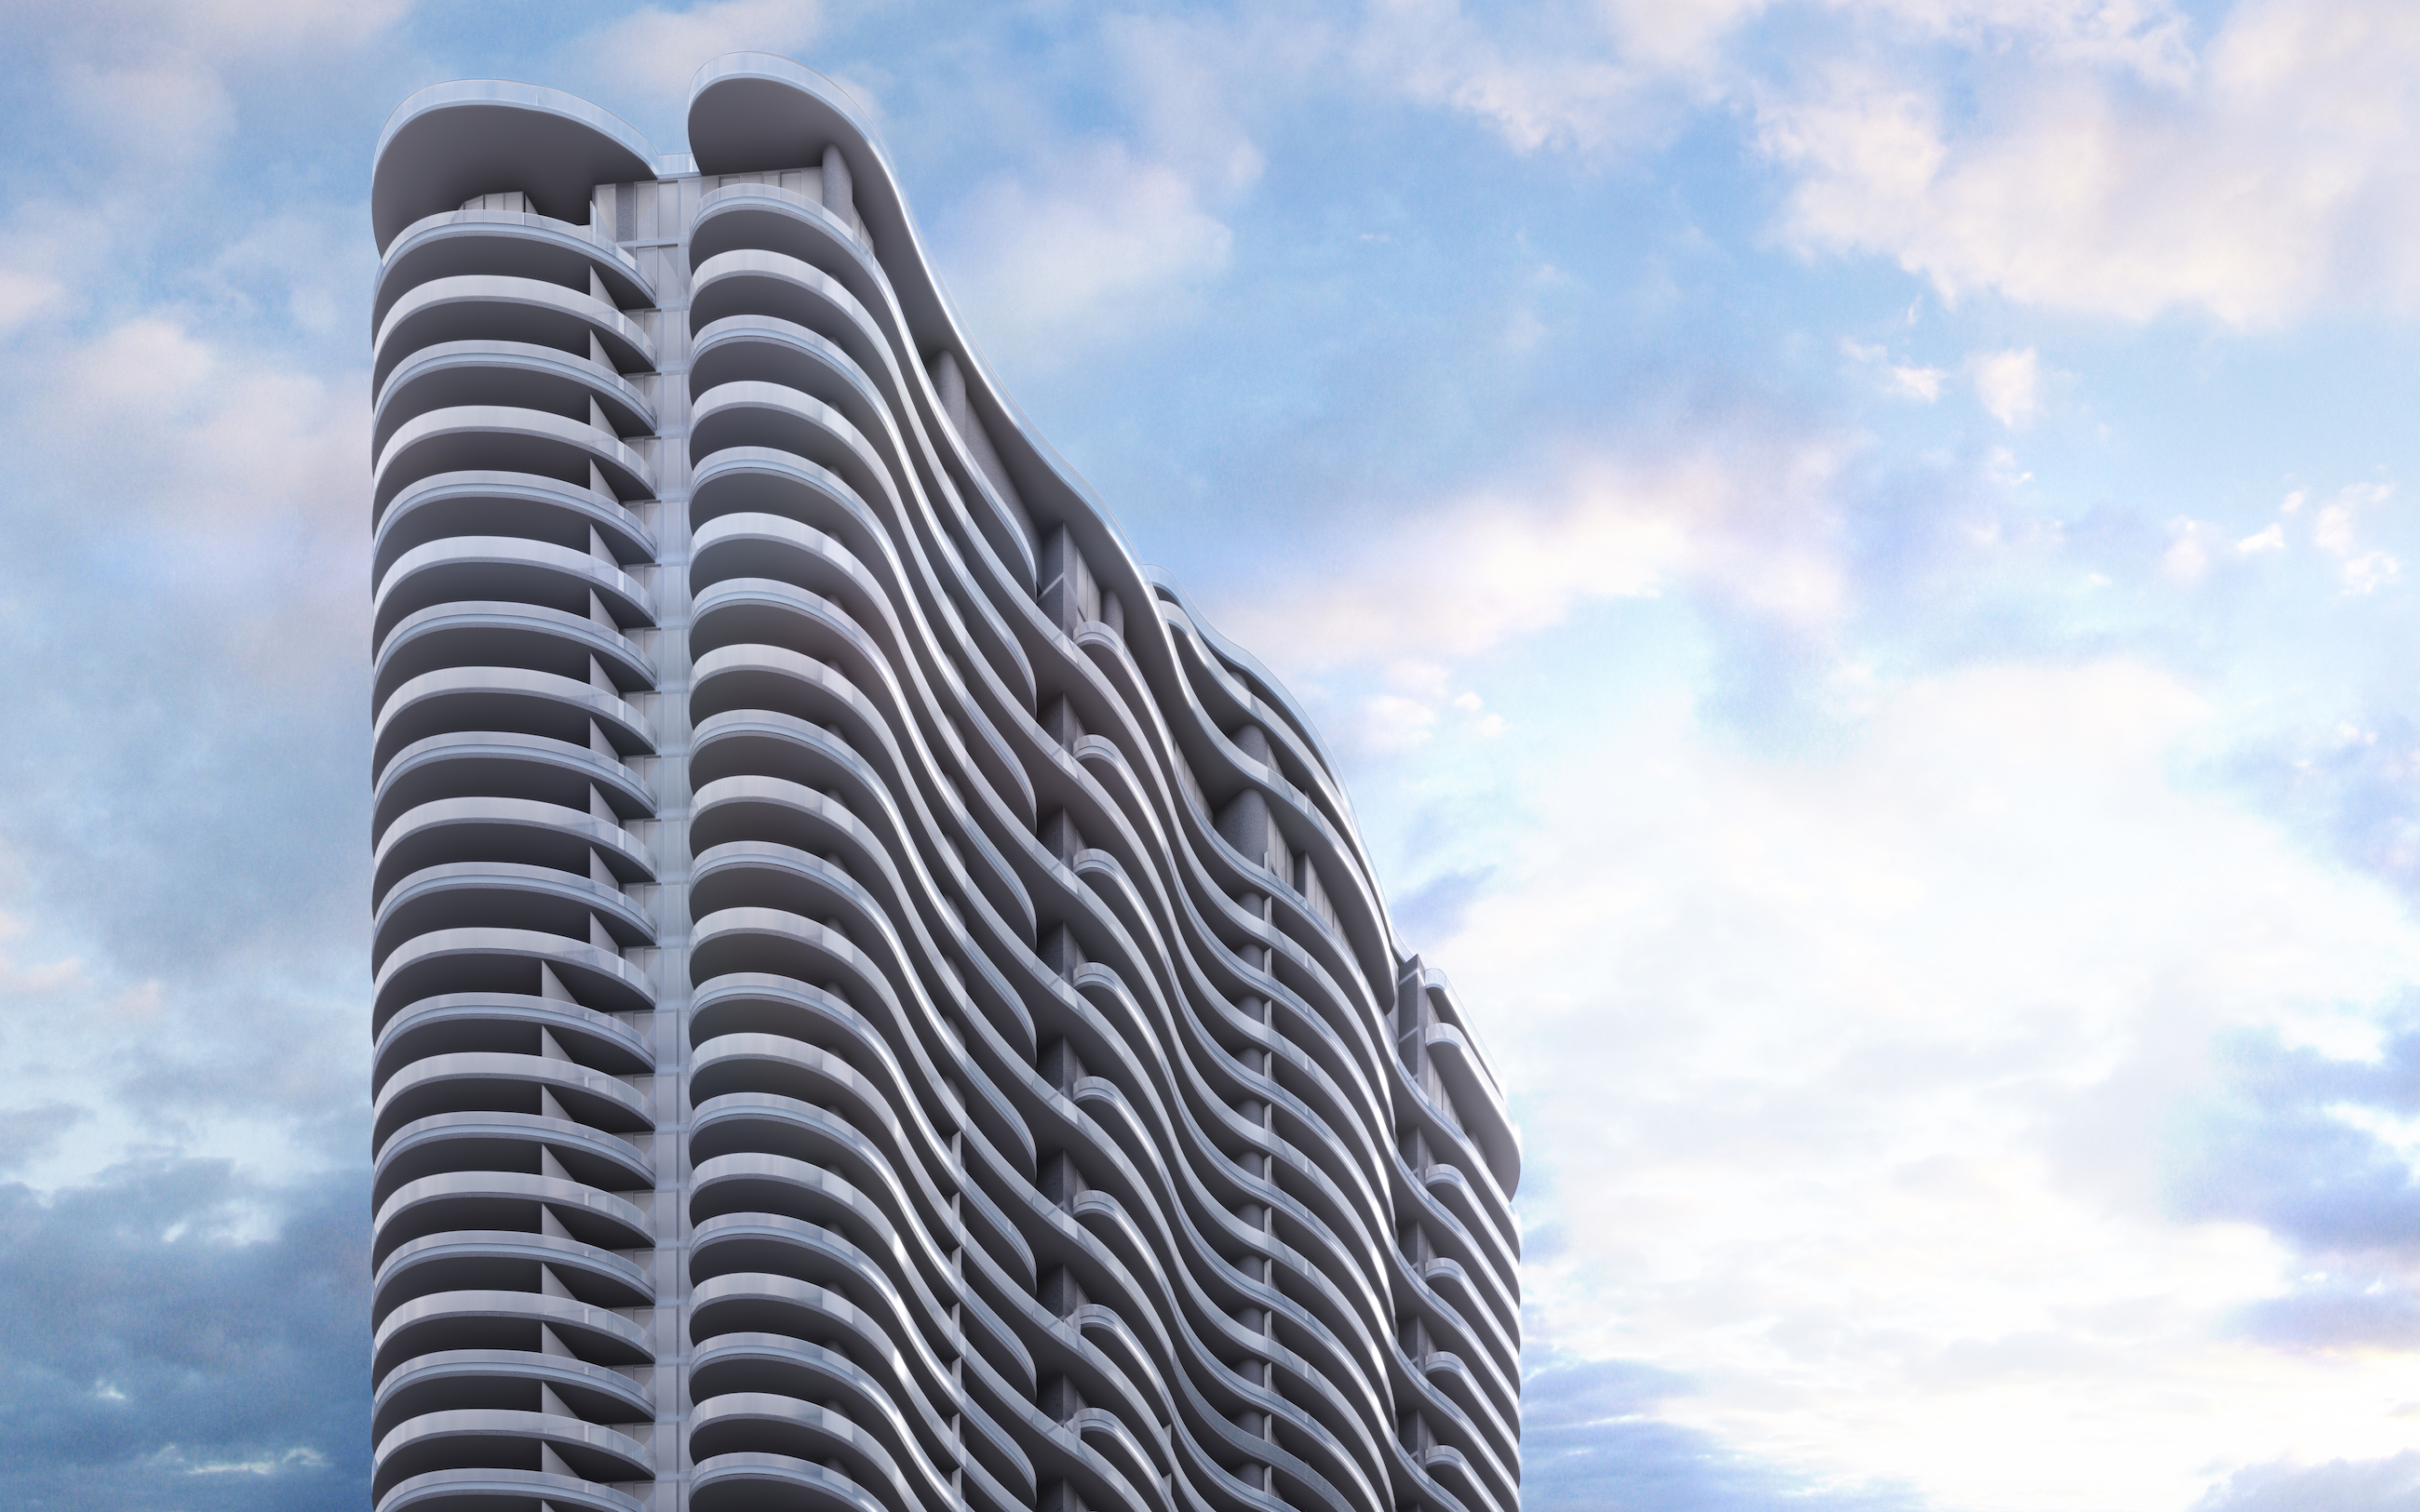 Acclaimed Miami architect Luis Revuelta creates a one-of-a-kind architectural environment that combines the tower’s distinct flatiron shape with flowing, curvilinear forms.